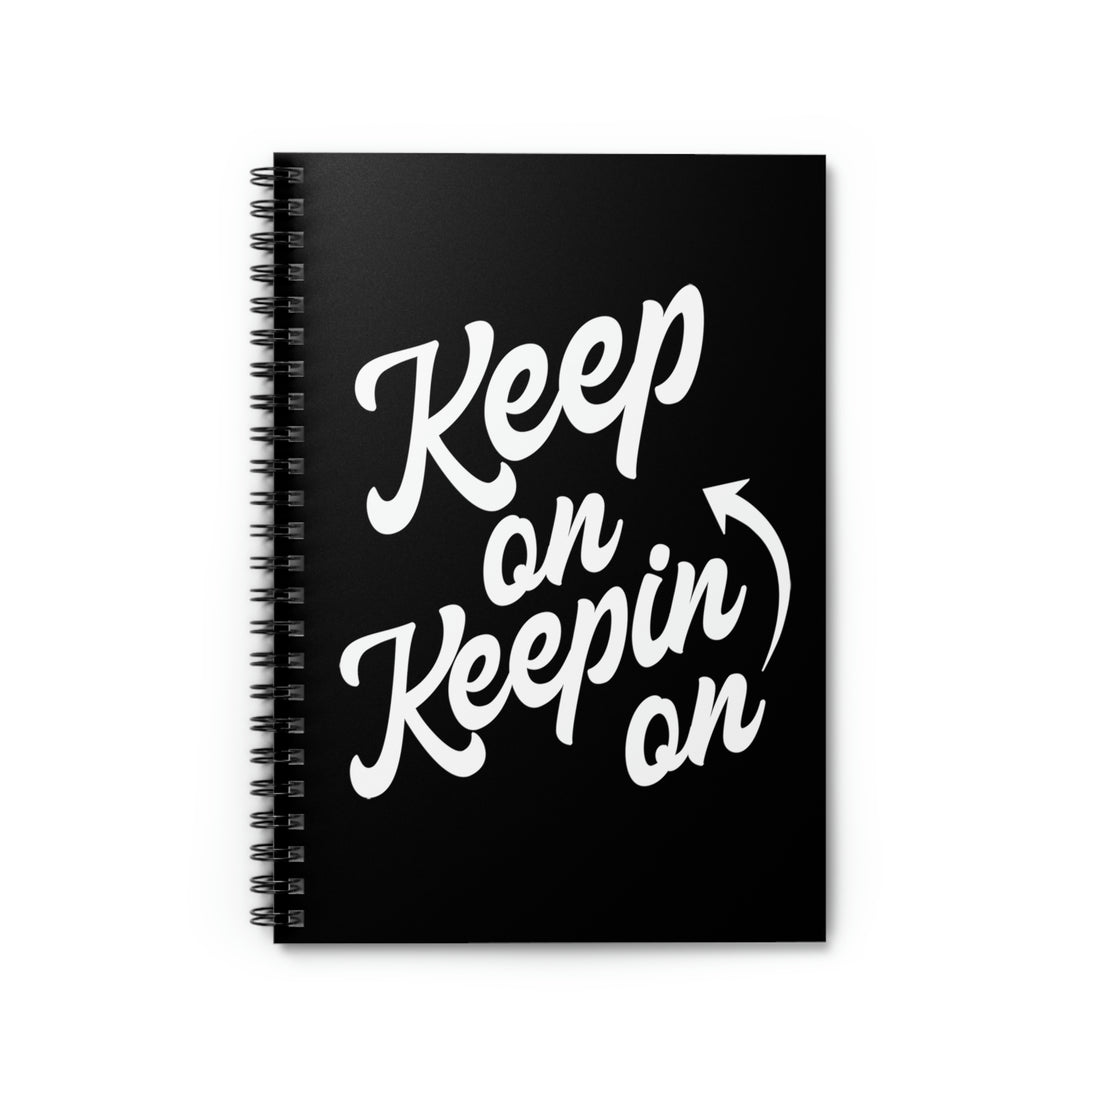 Keep On Keepin On - Spiral Notebook - Ruled Line